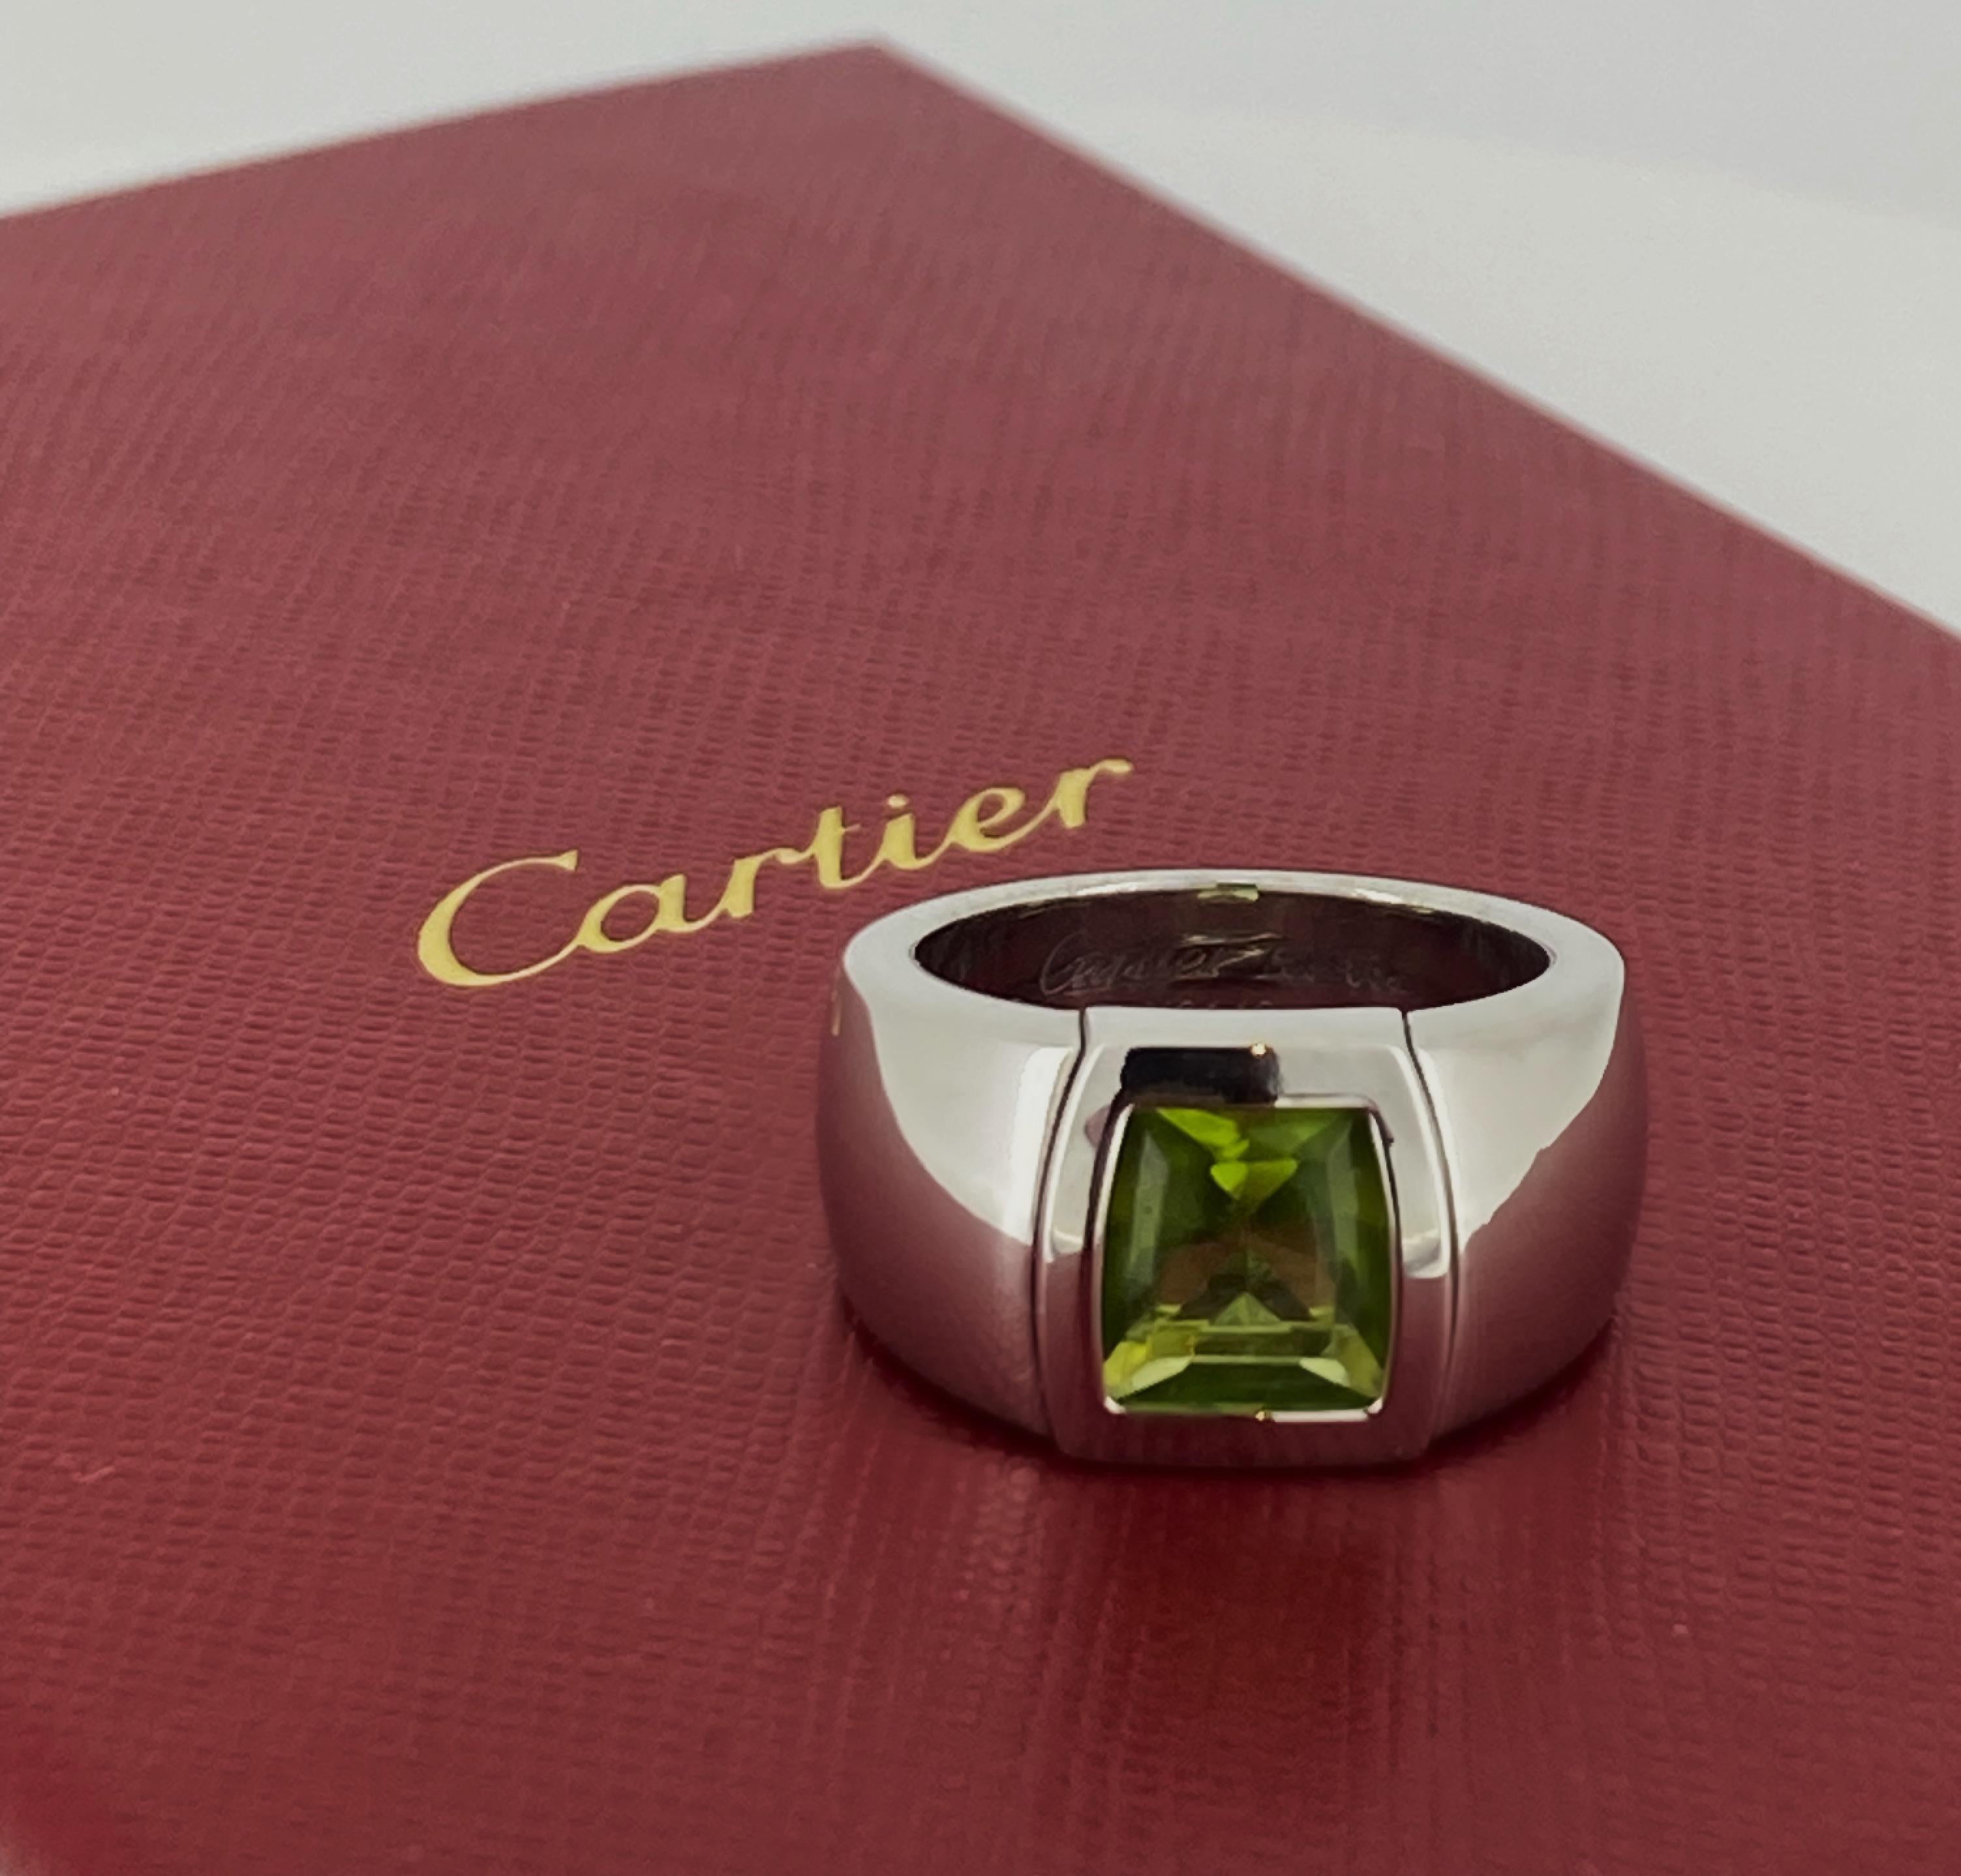 This iconic Cartier 